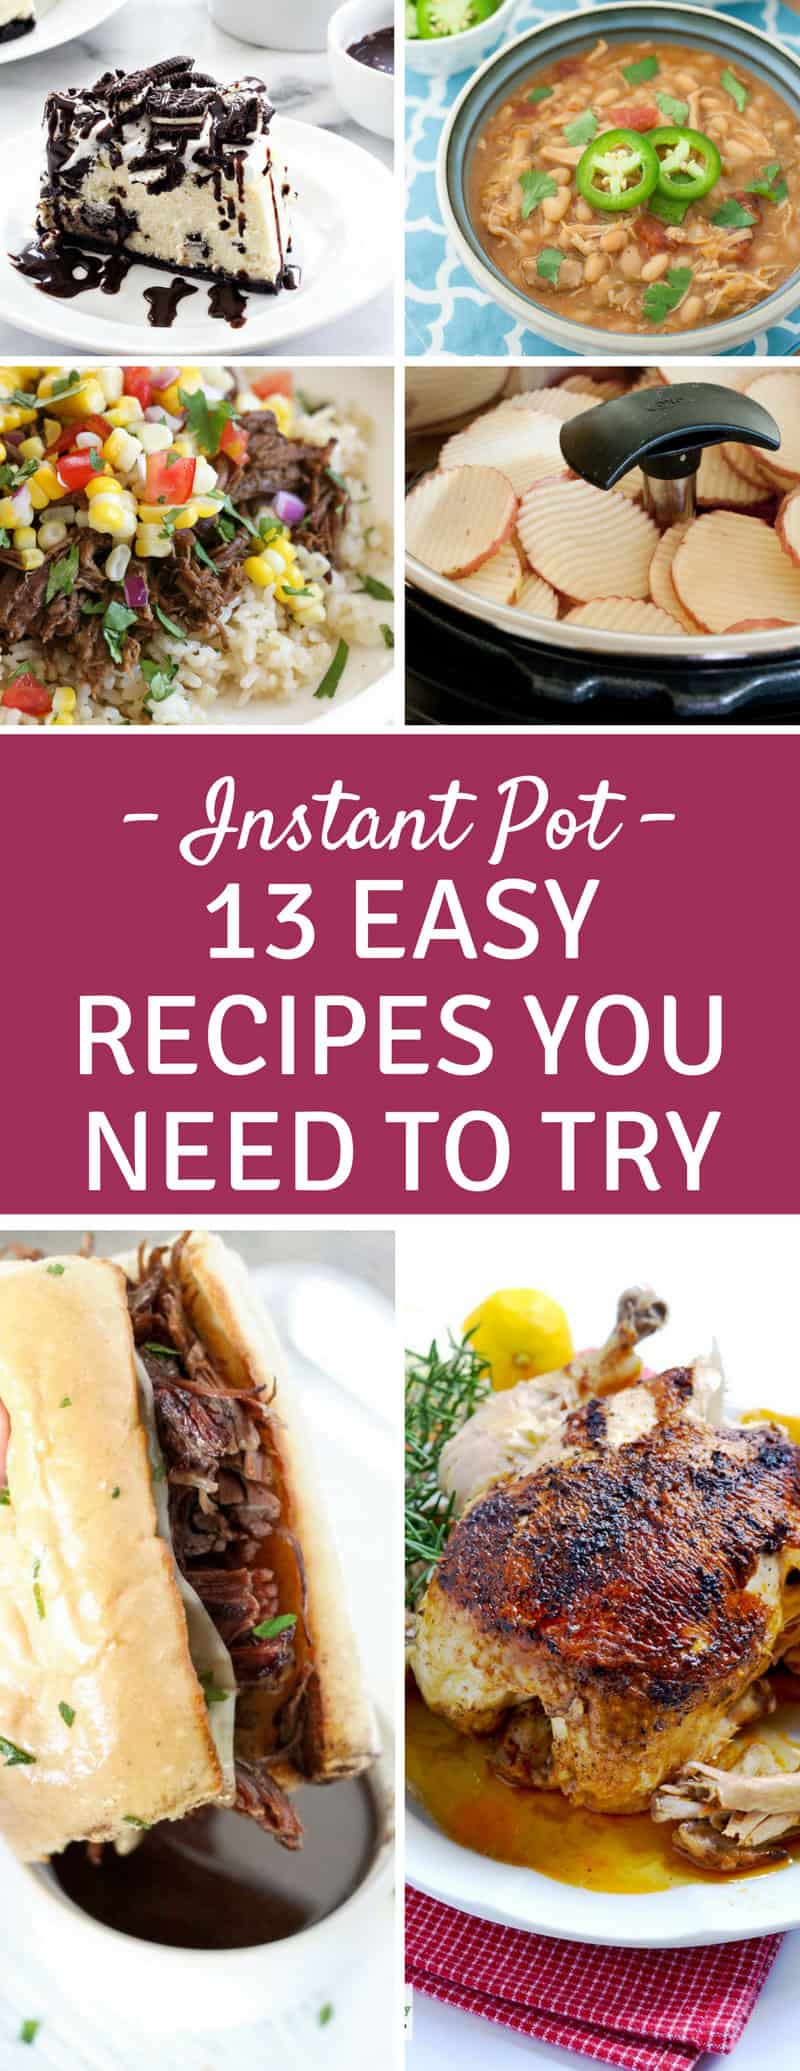 13 Easy Instant Pot Recipes You Need to Feed Your Family!